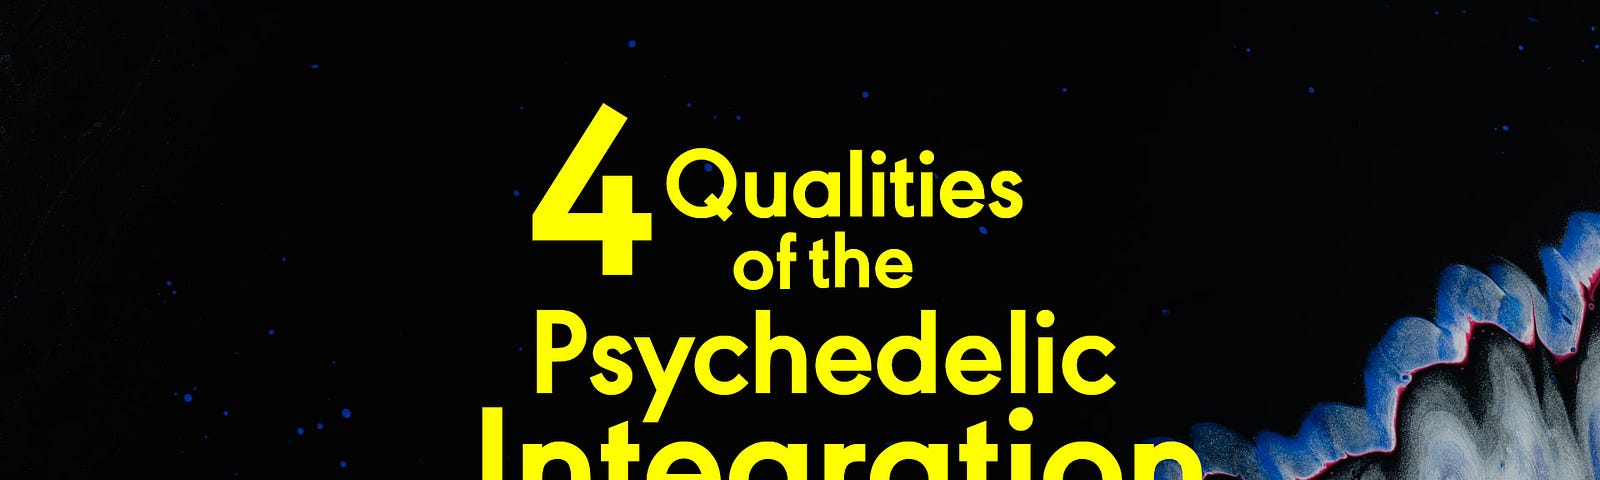 qualities of the psychedelic integration cabbanis